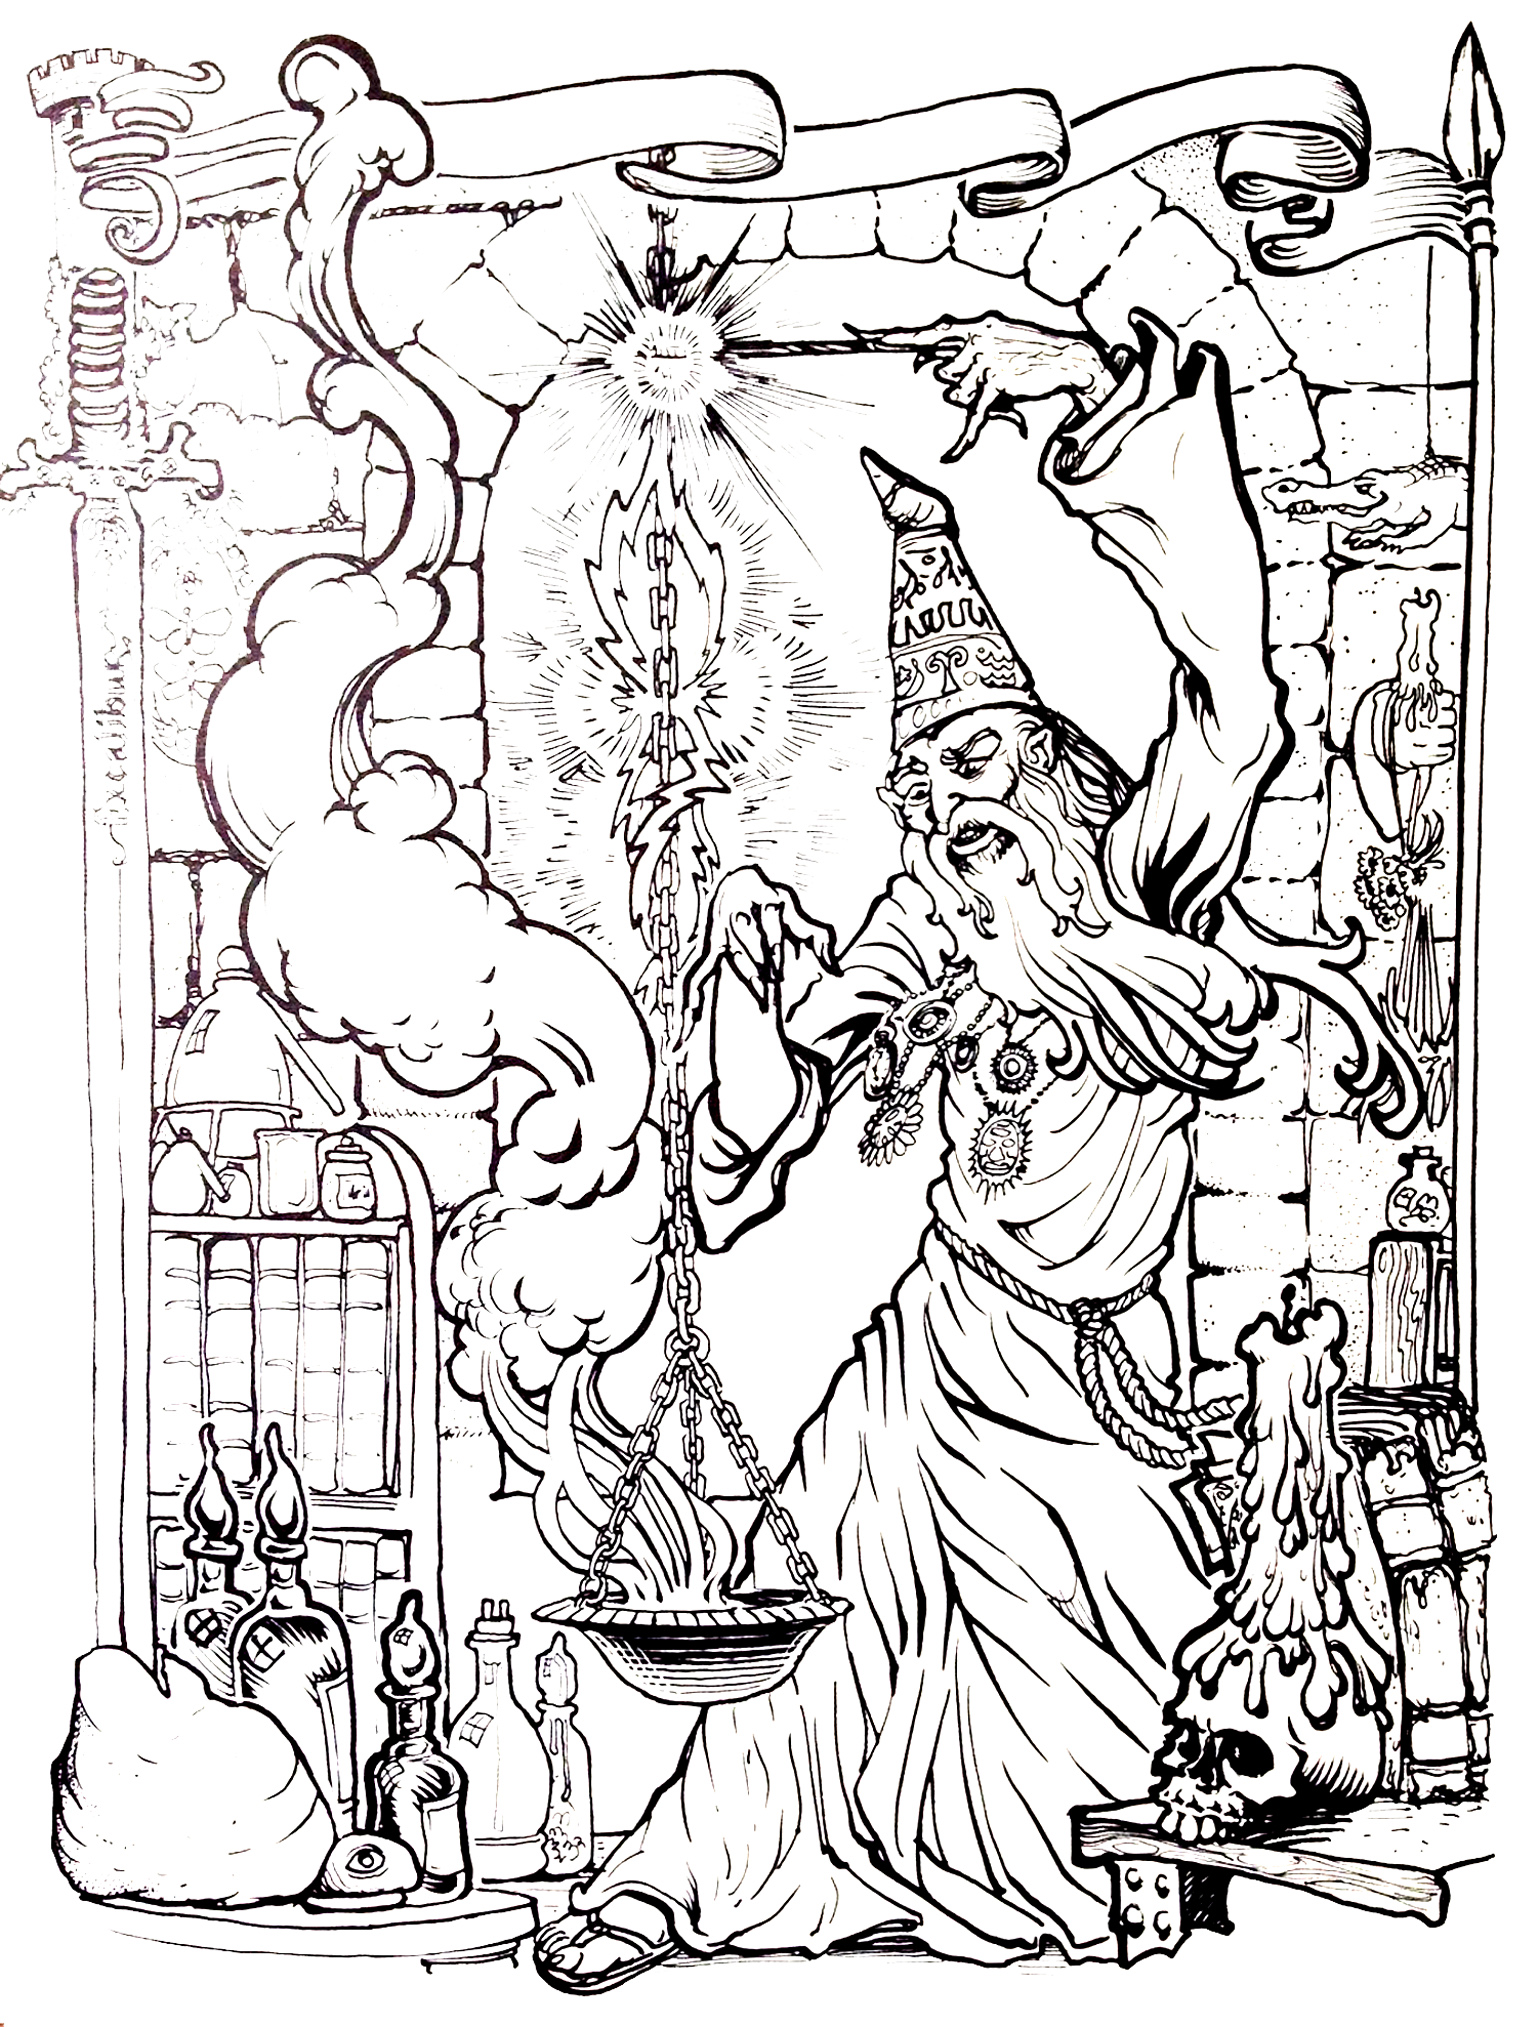 Drawing to print & color of the great Merlin